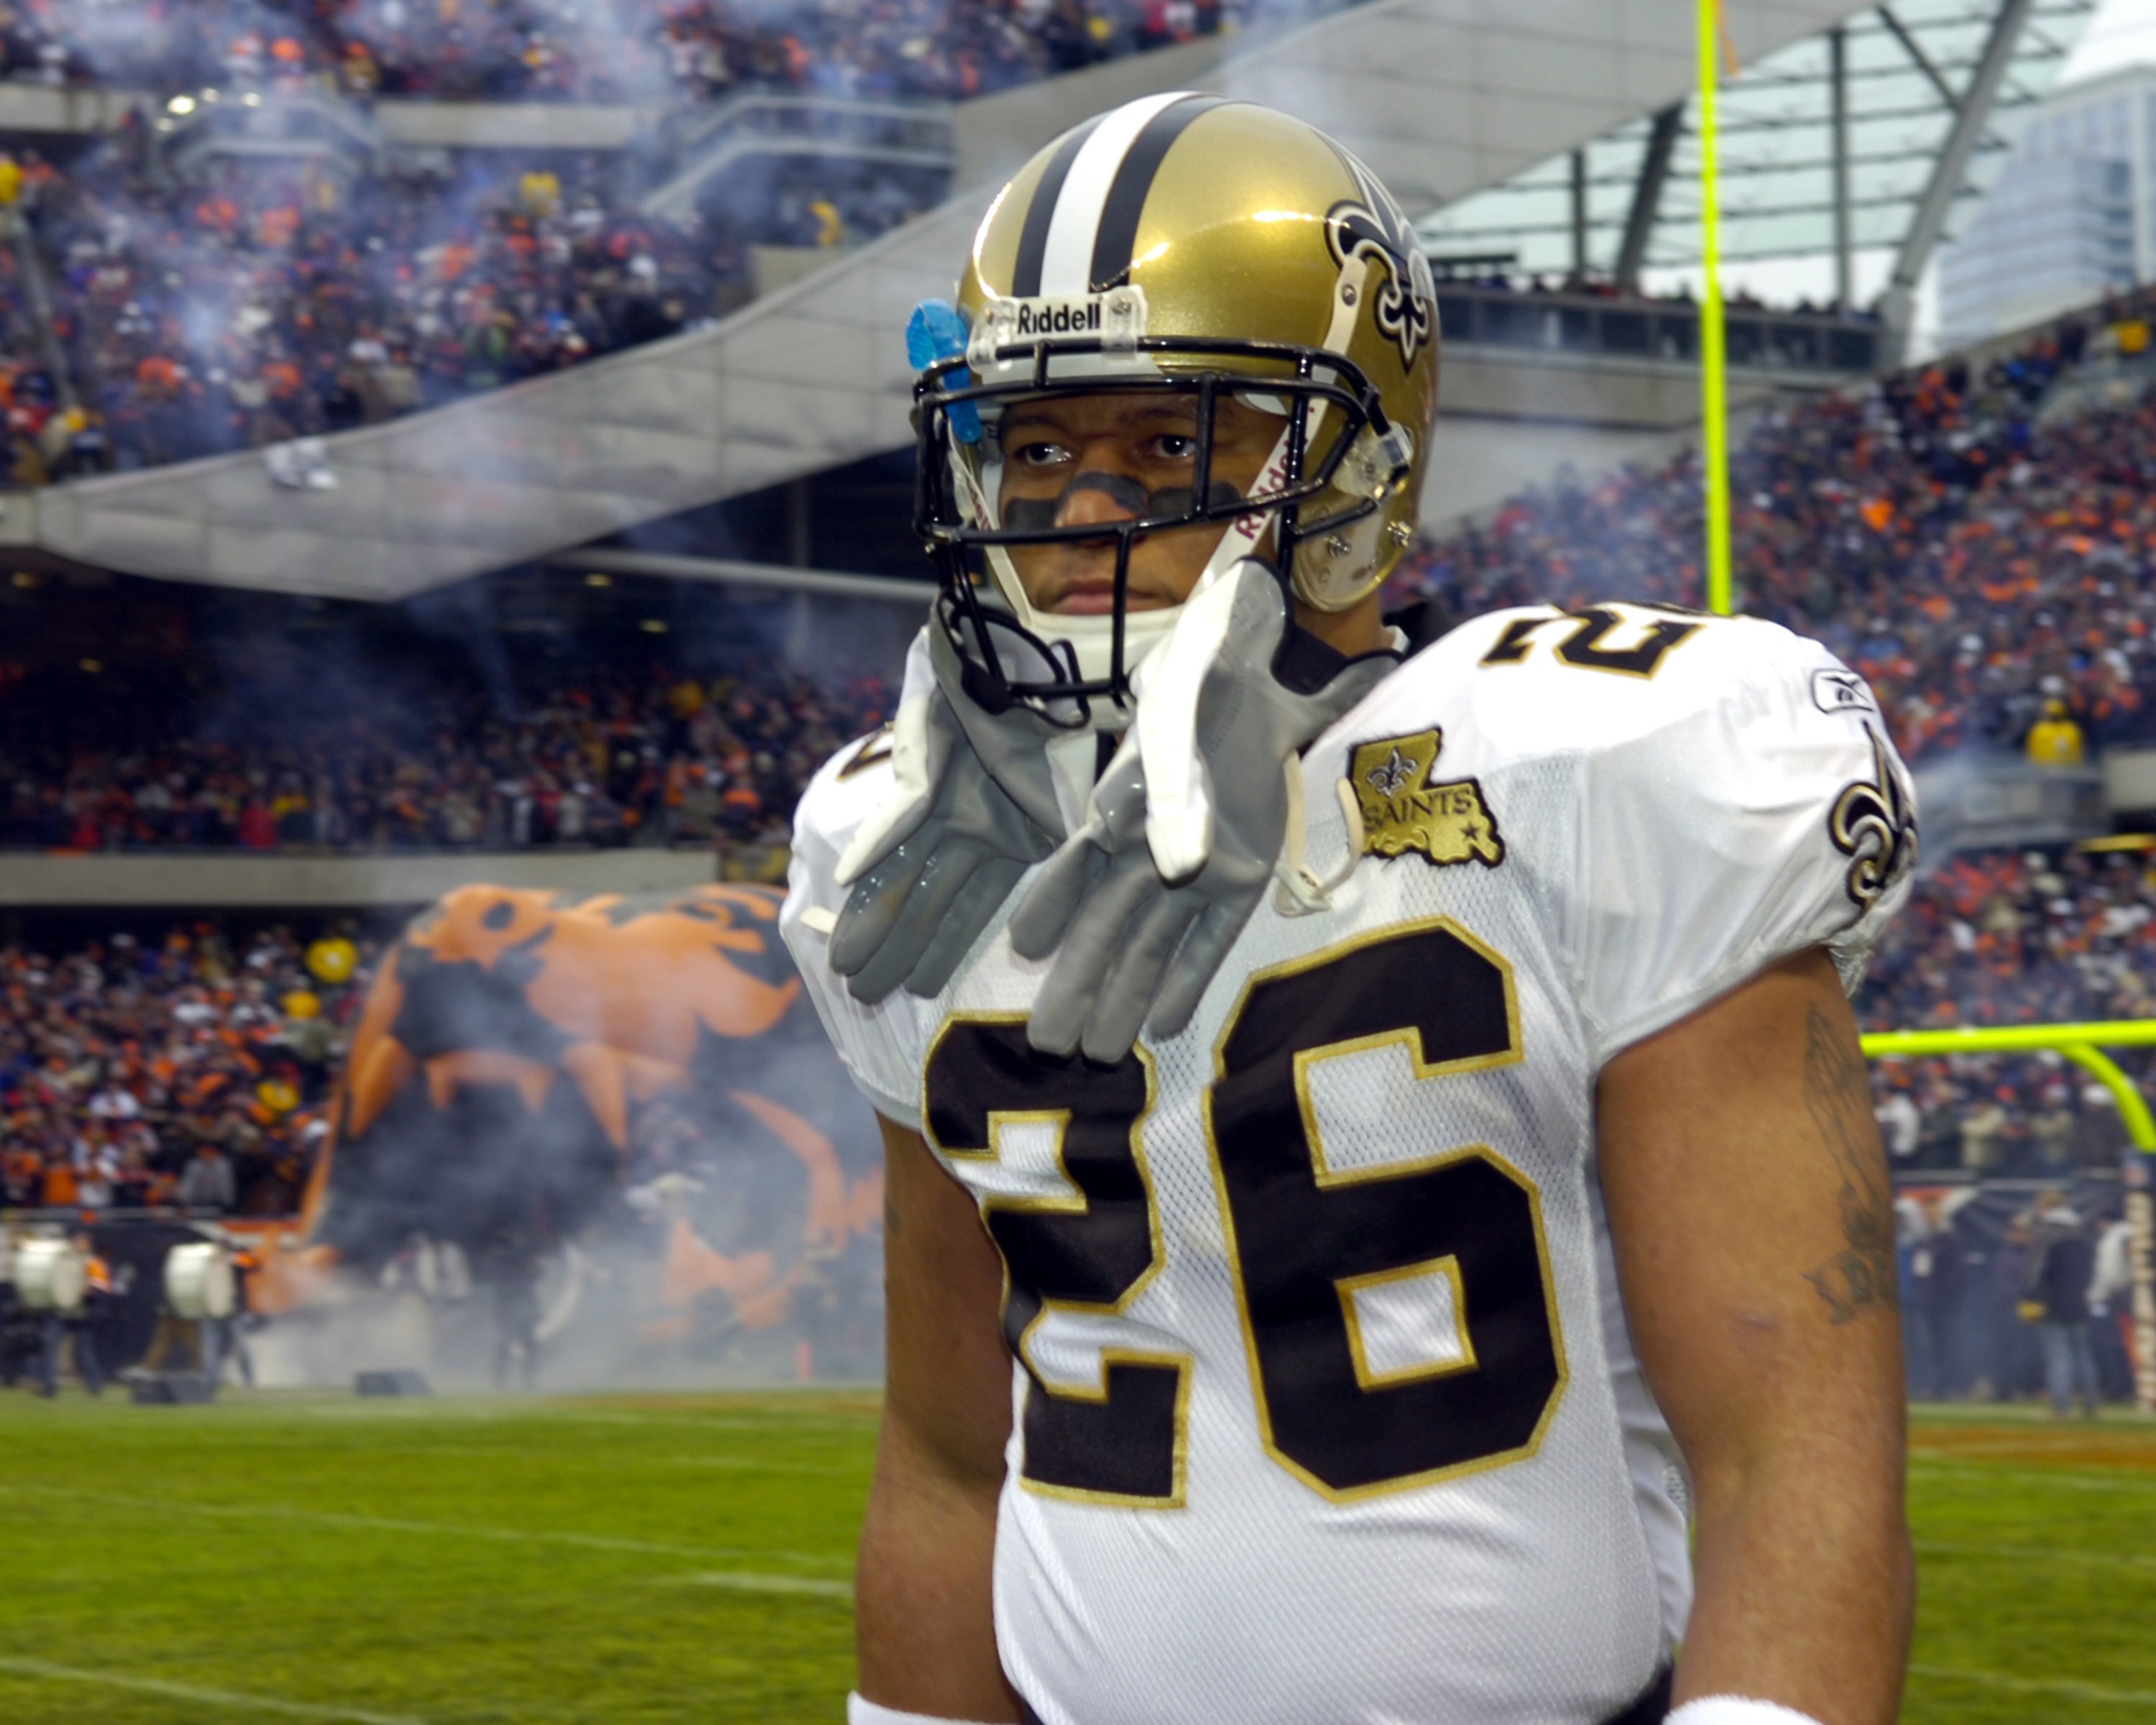 The Top 5 running backs in New Orleans Saints history